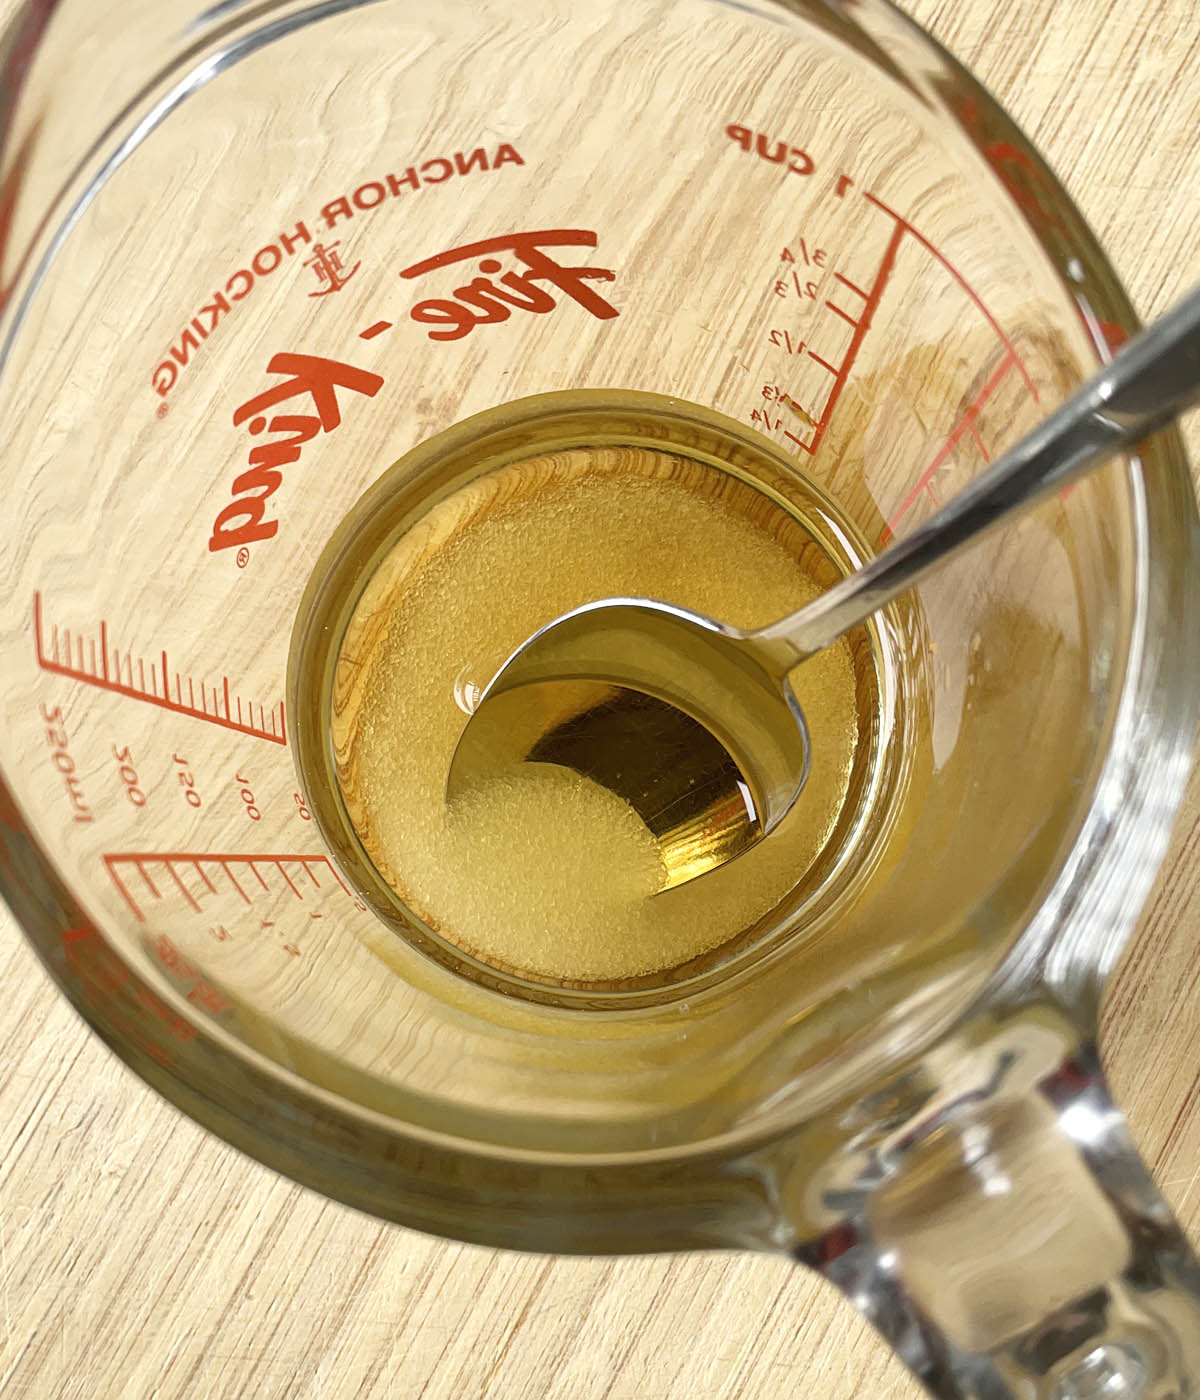 A glass measuring cup containing a clear yellow liquid, white sugar, and spoon.